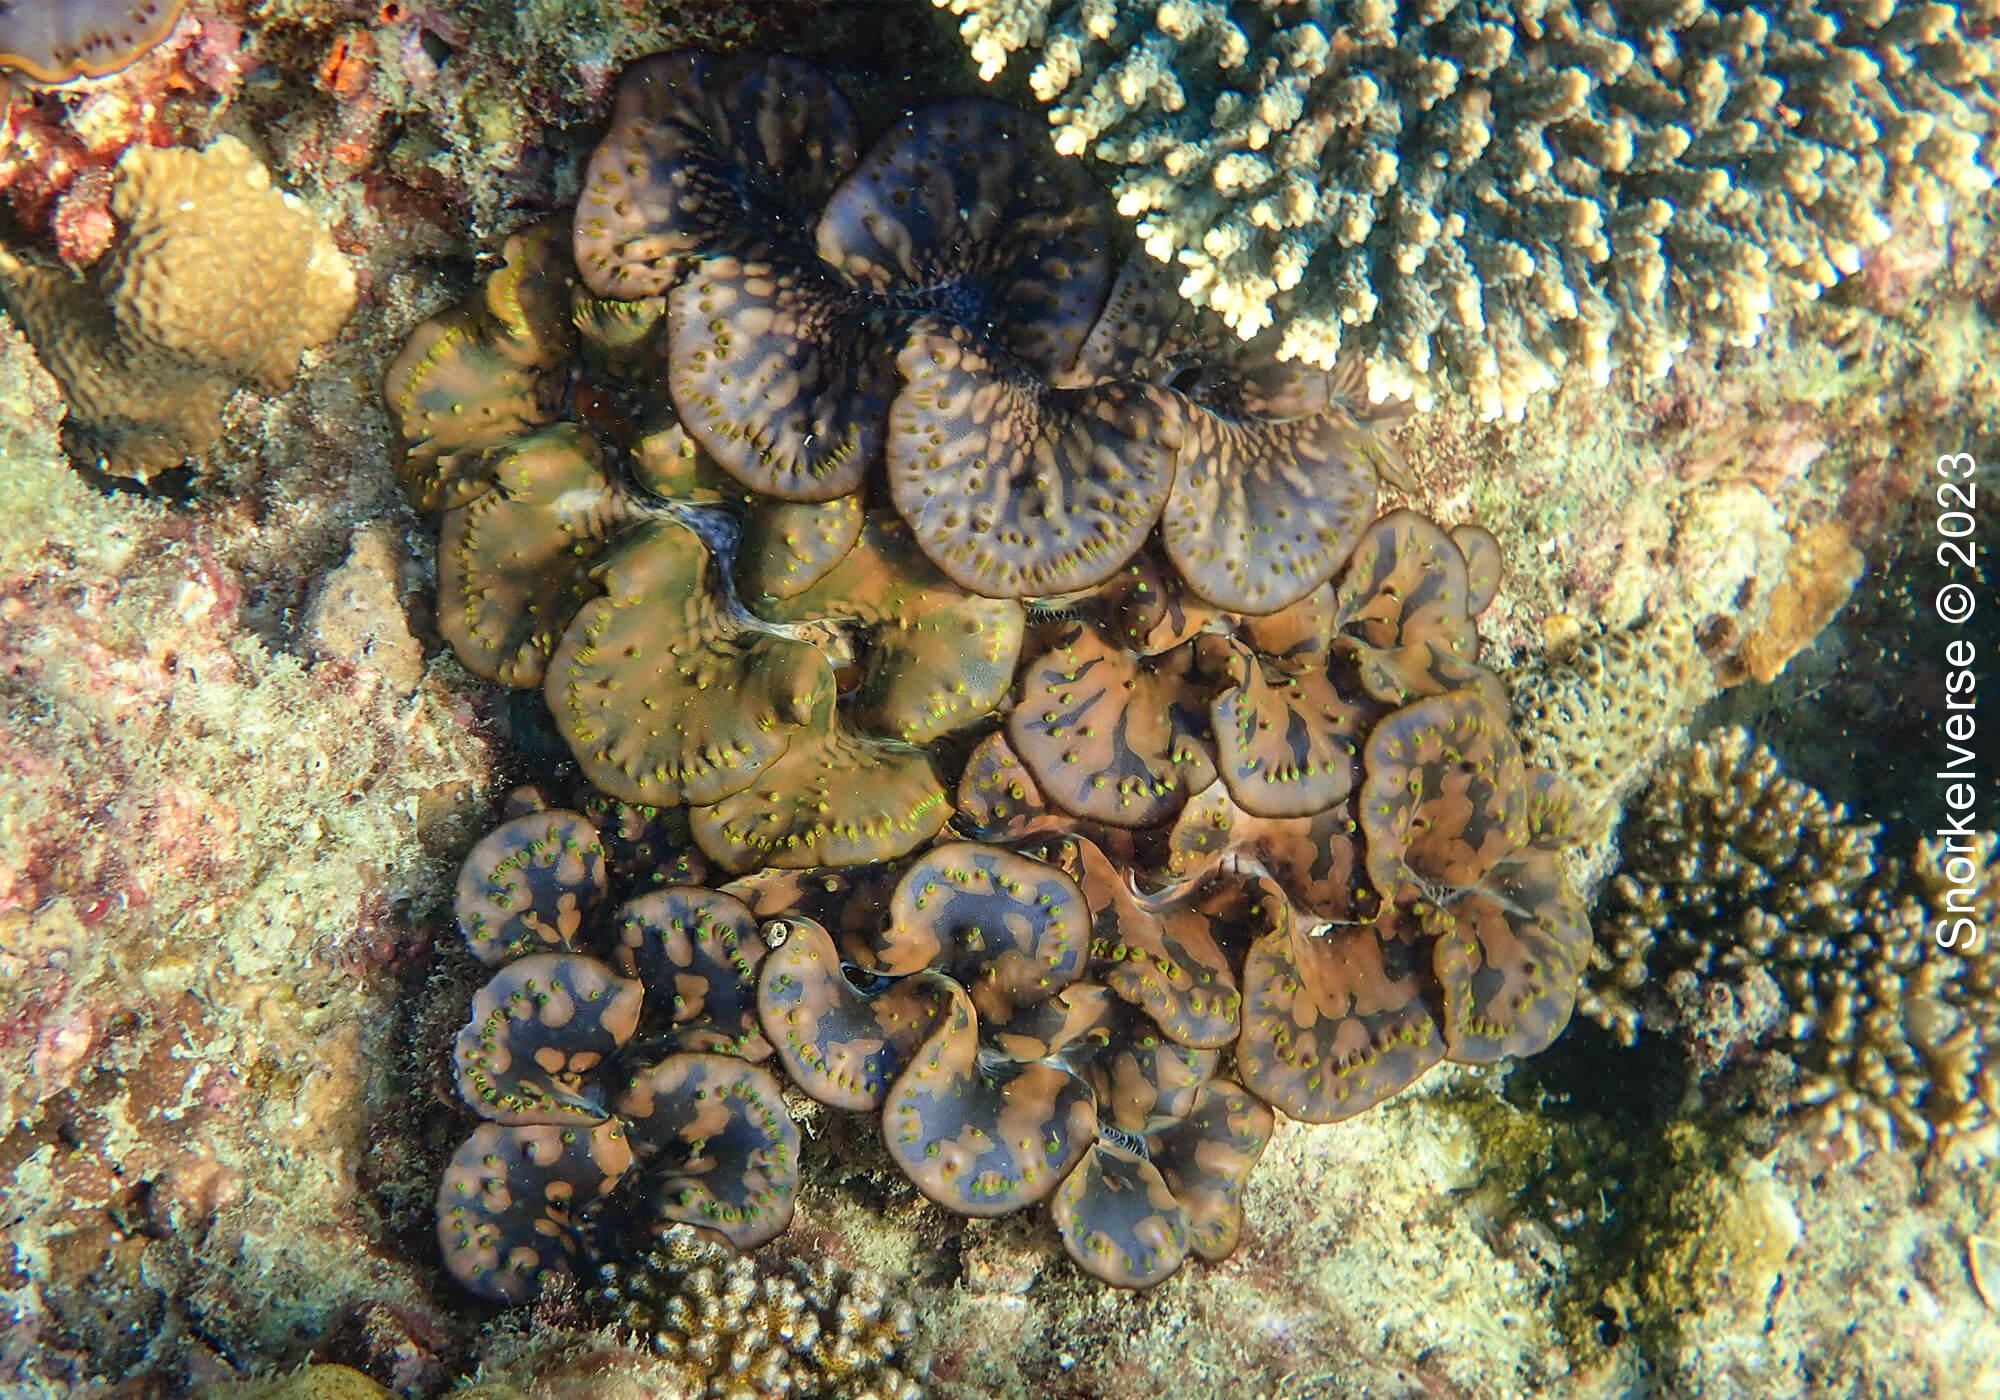 Patch of Giant Clams